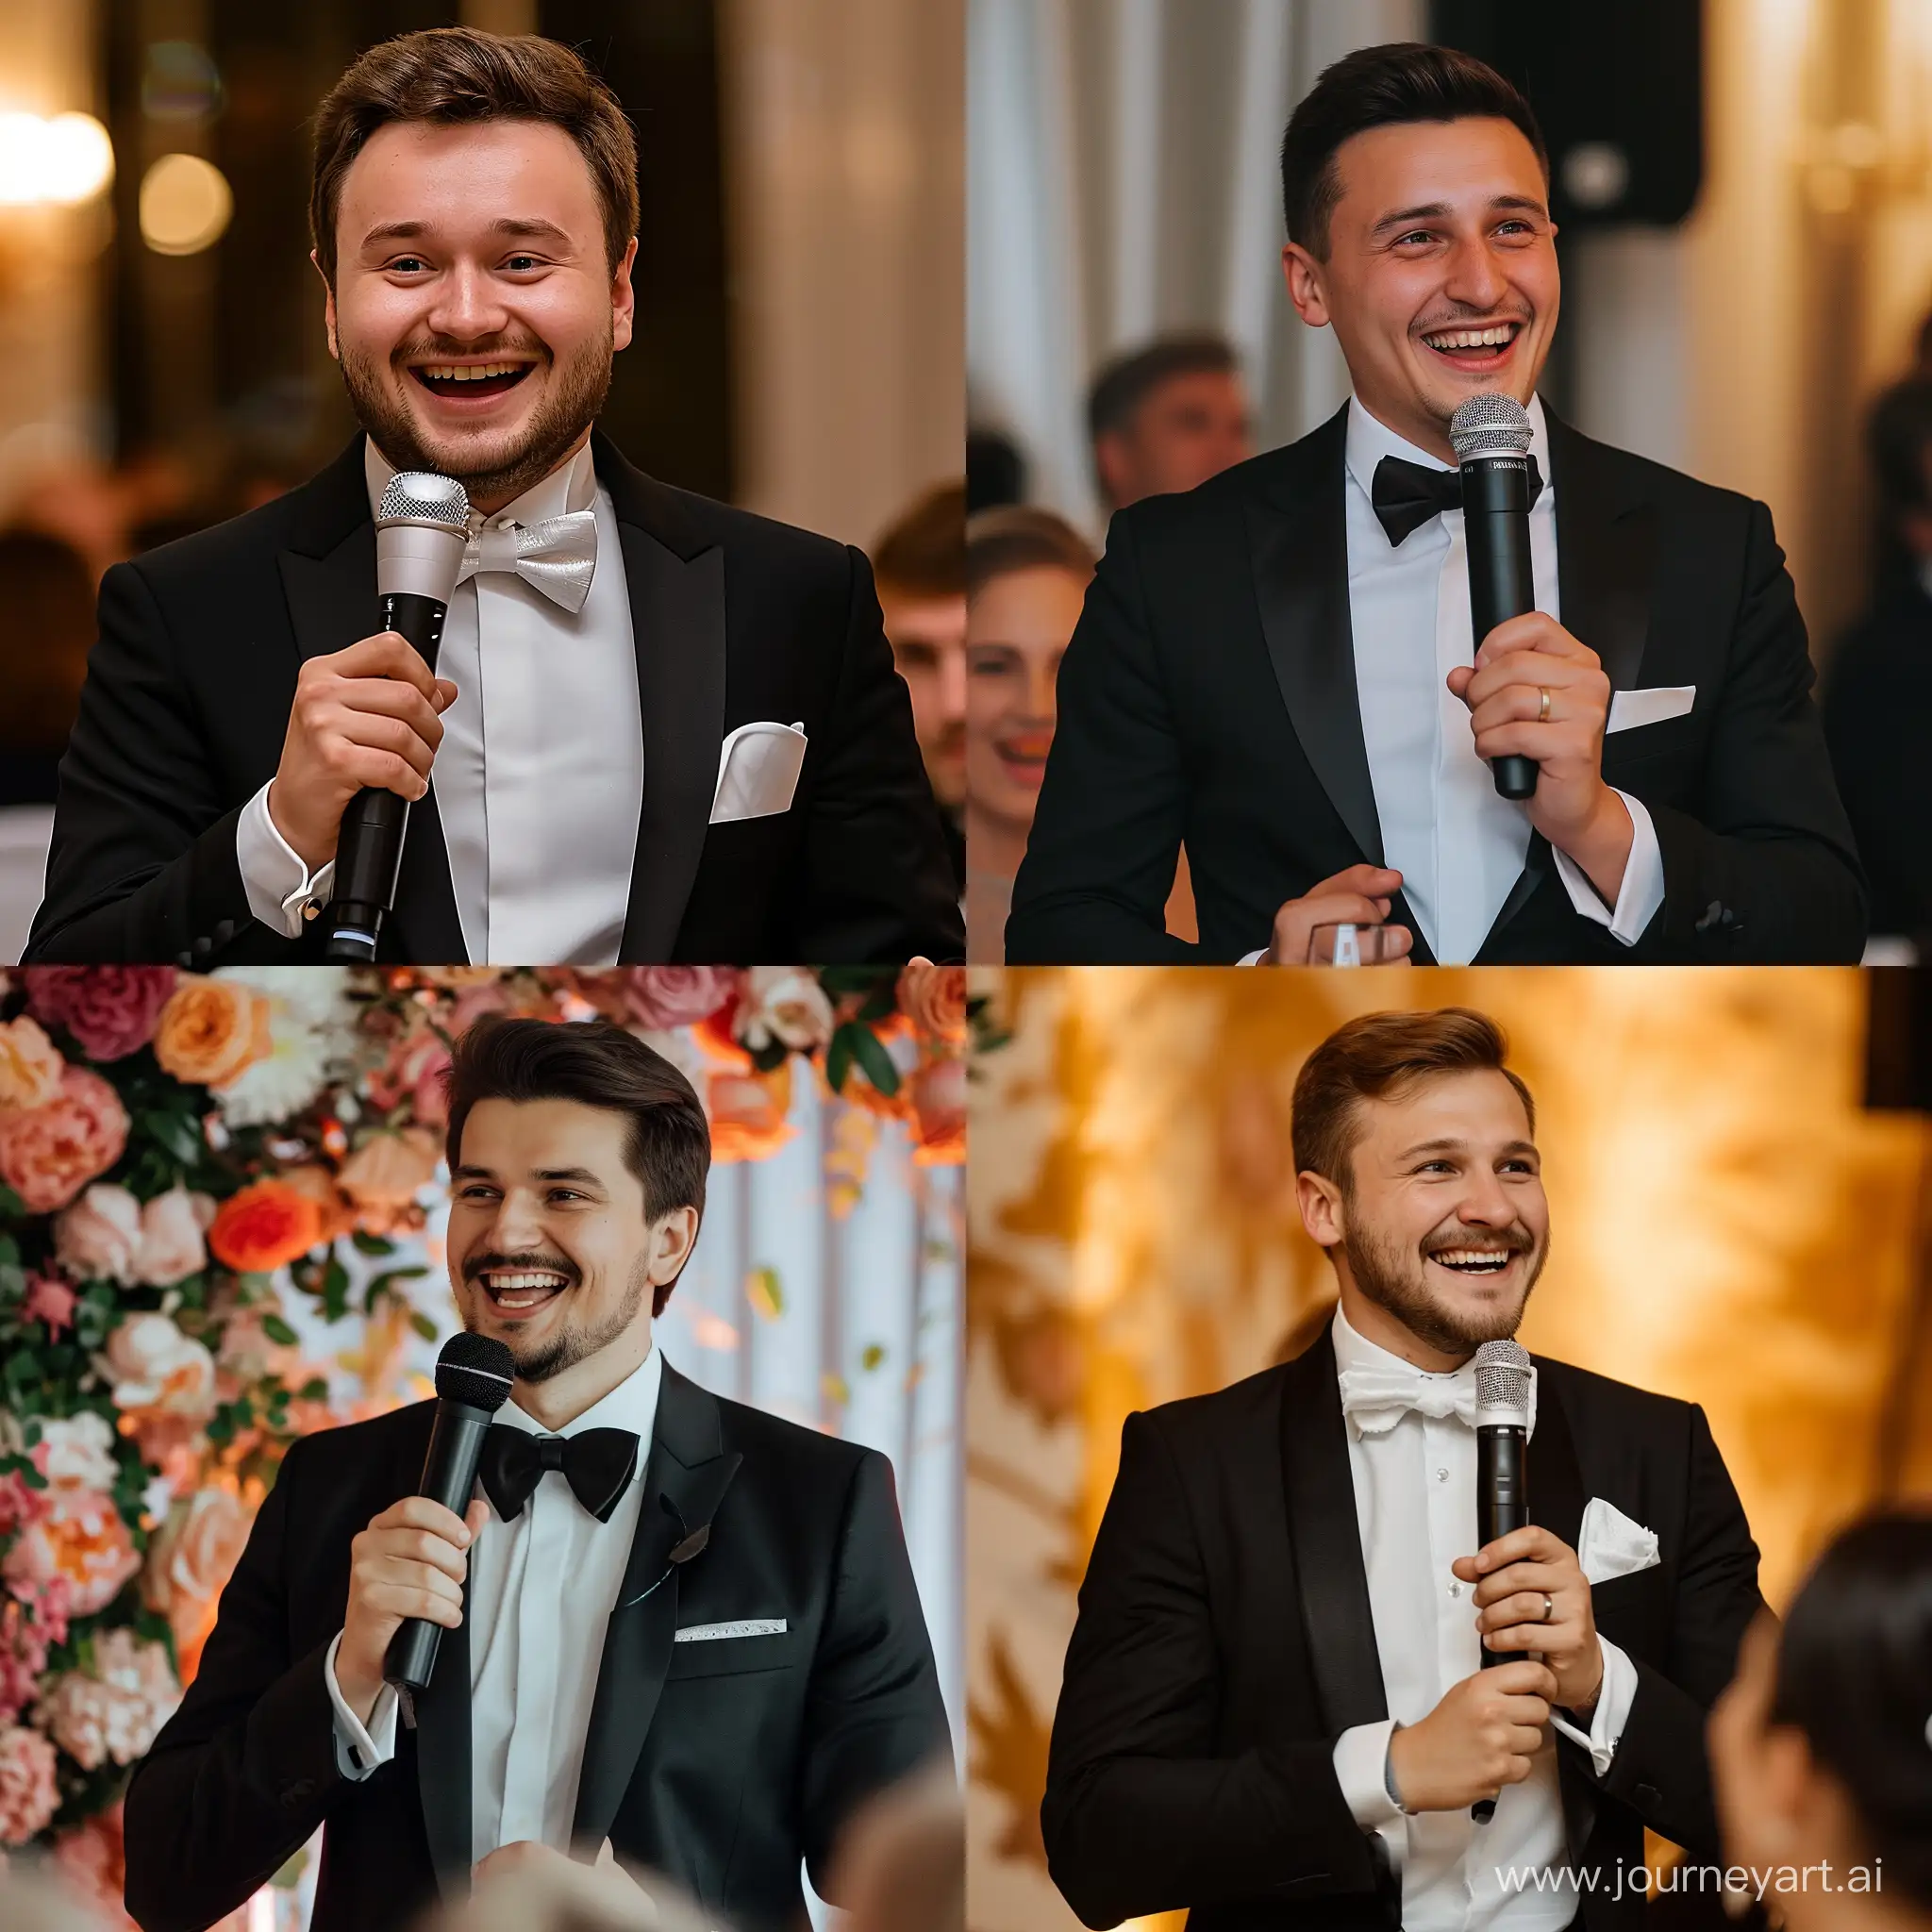 Elegant-Wedding-Host-Yuri-Tunyan-Charms-in-Black-Tuxedo-and-Bow-Tie-with-Microphone-in-Hand